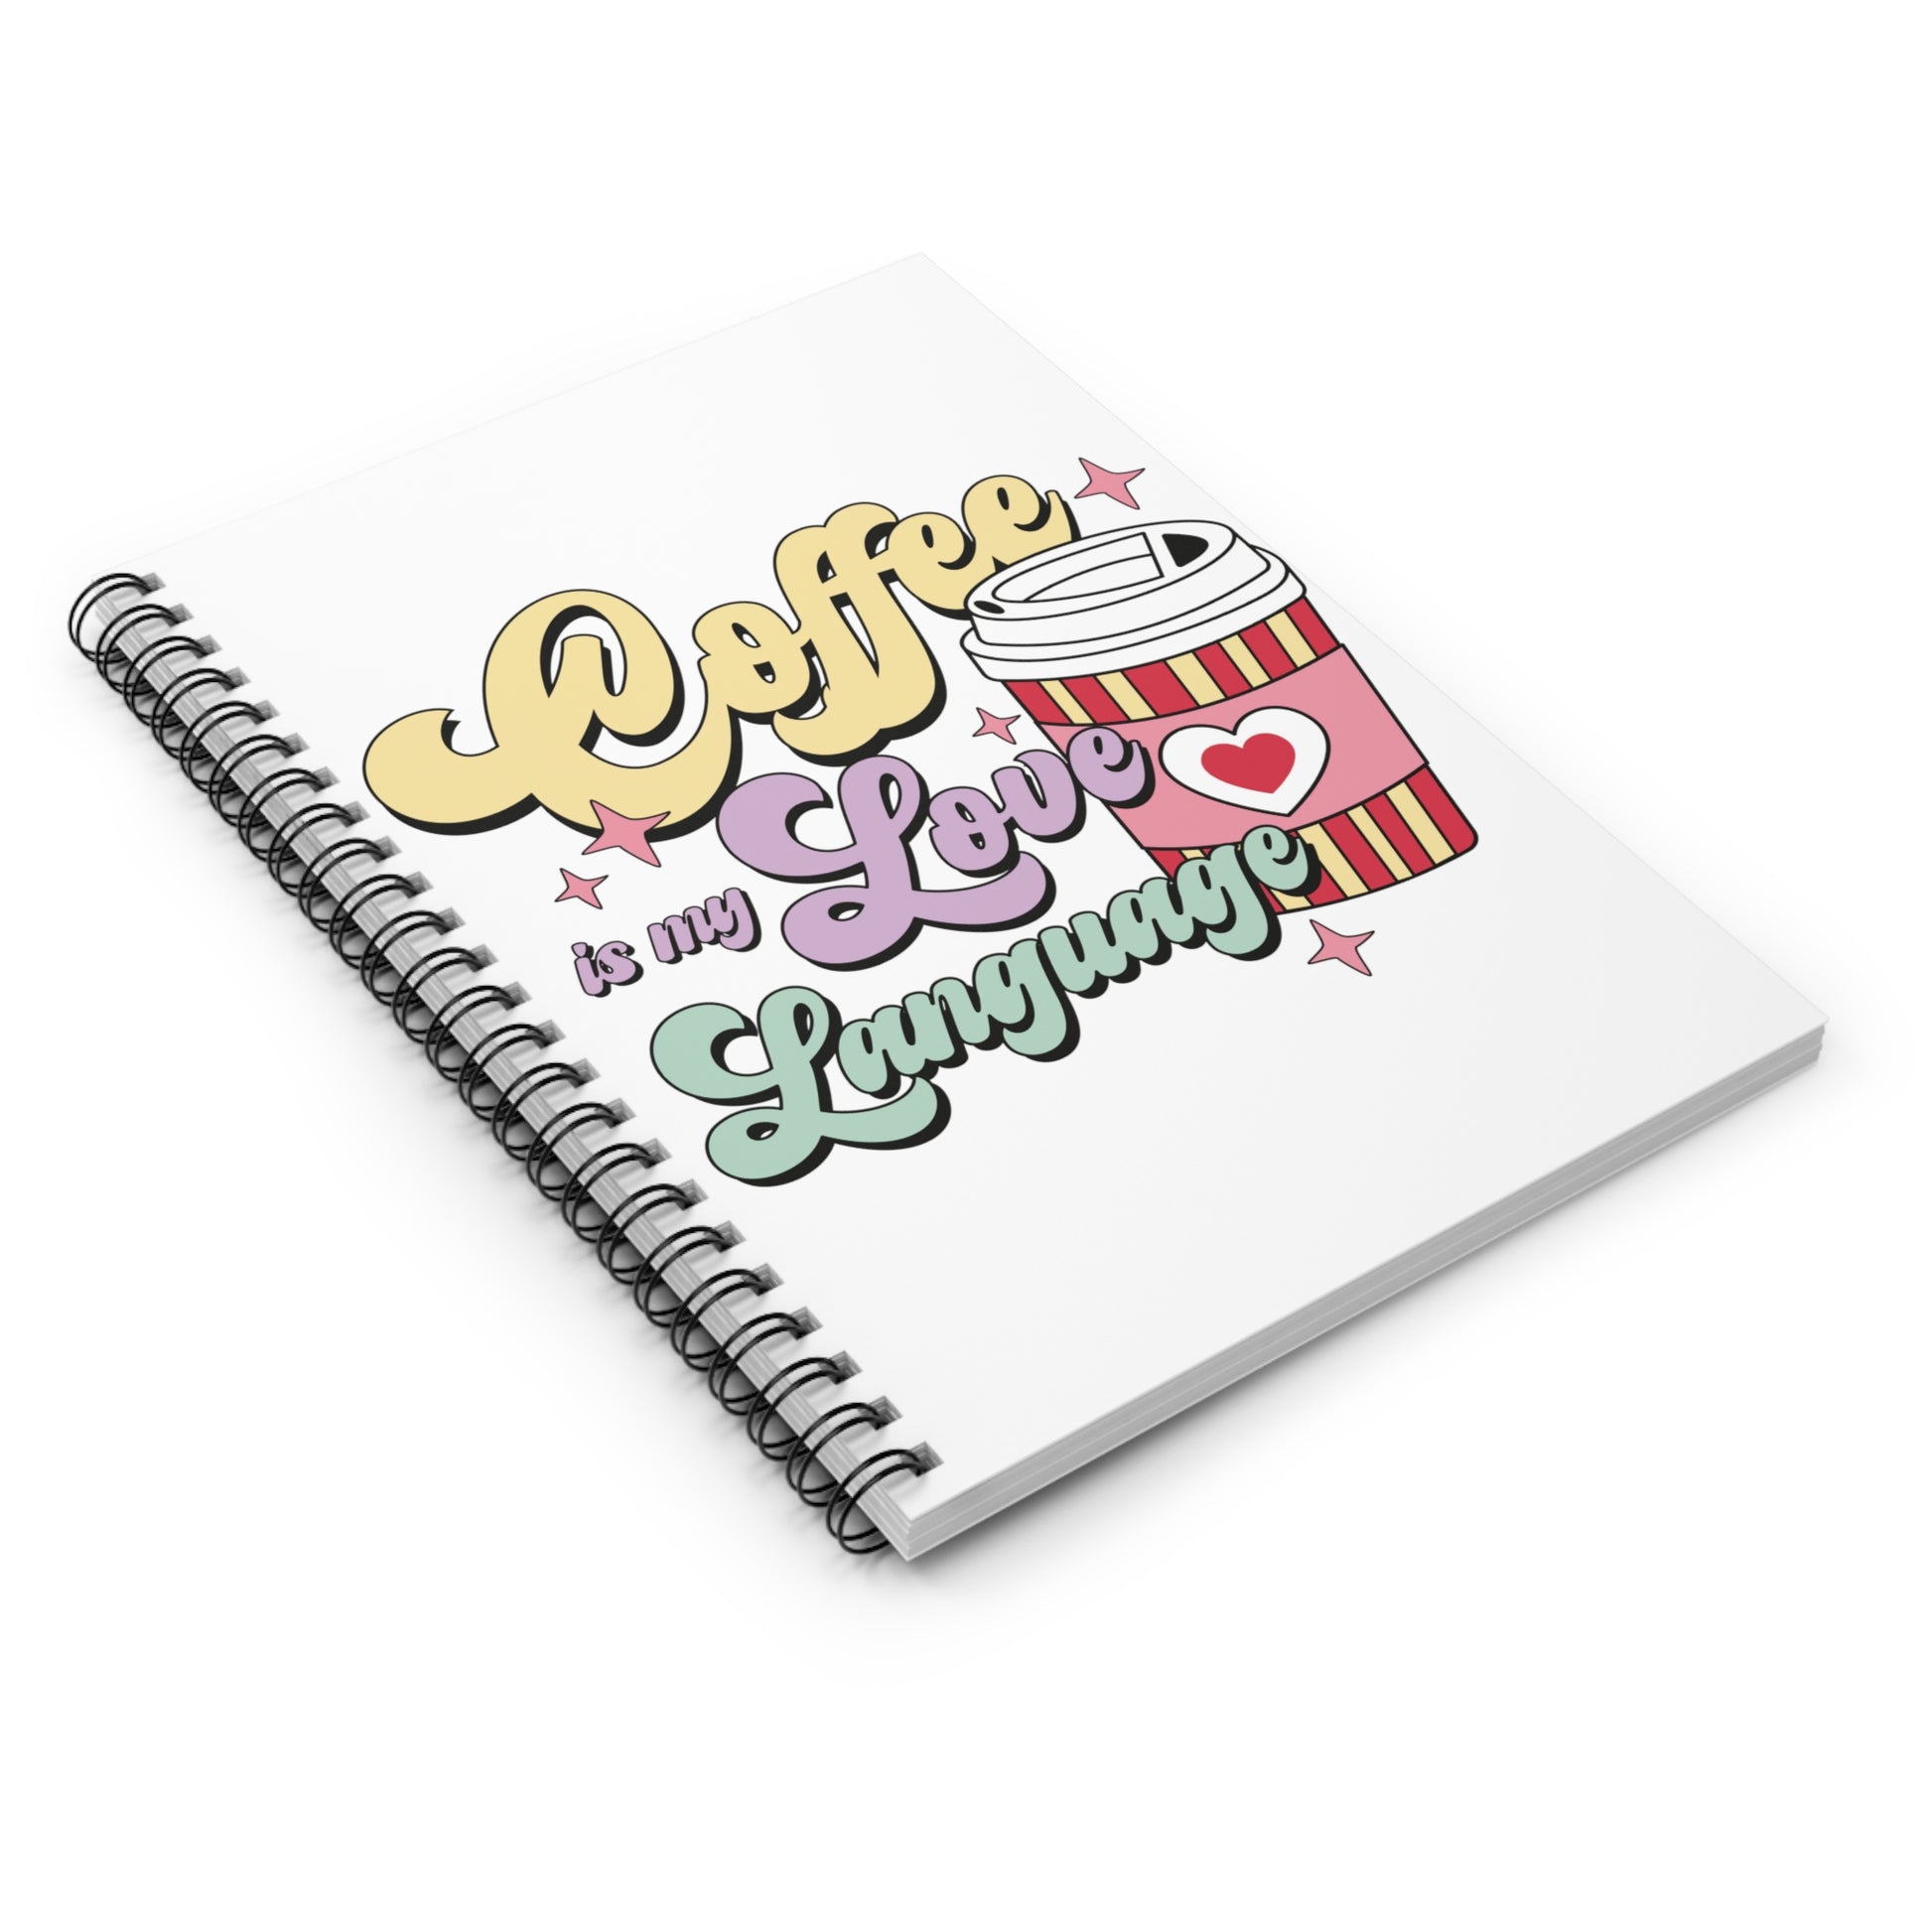 Coffee Love Language: Spiral Notebook - Log Books - Journals - Diaries - and More Custom Printed by TheGlassyLass